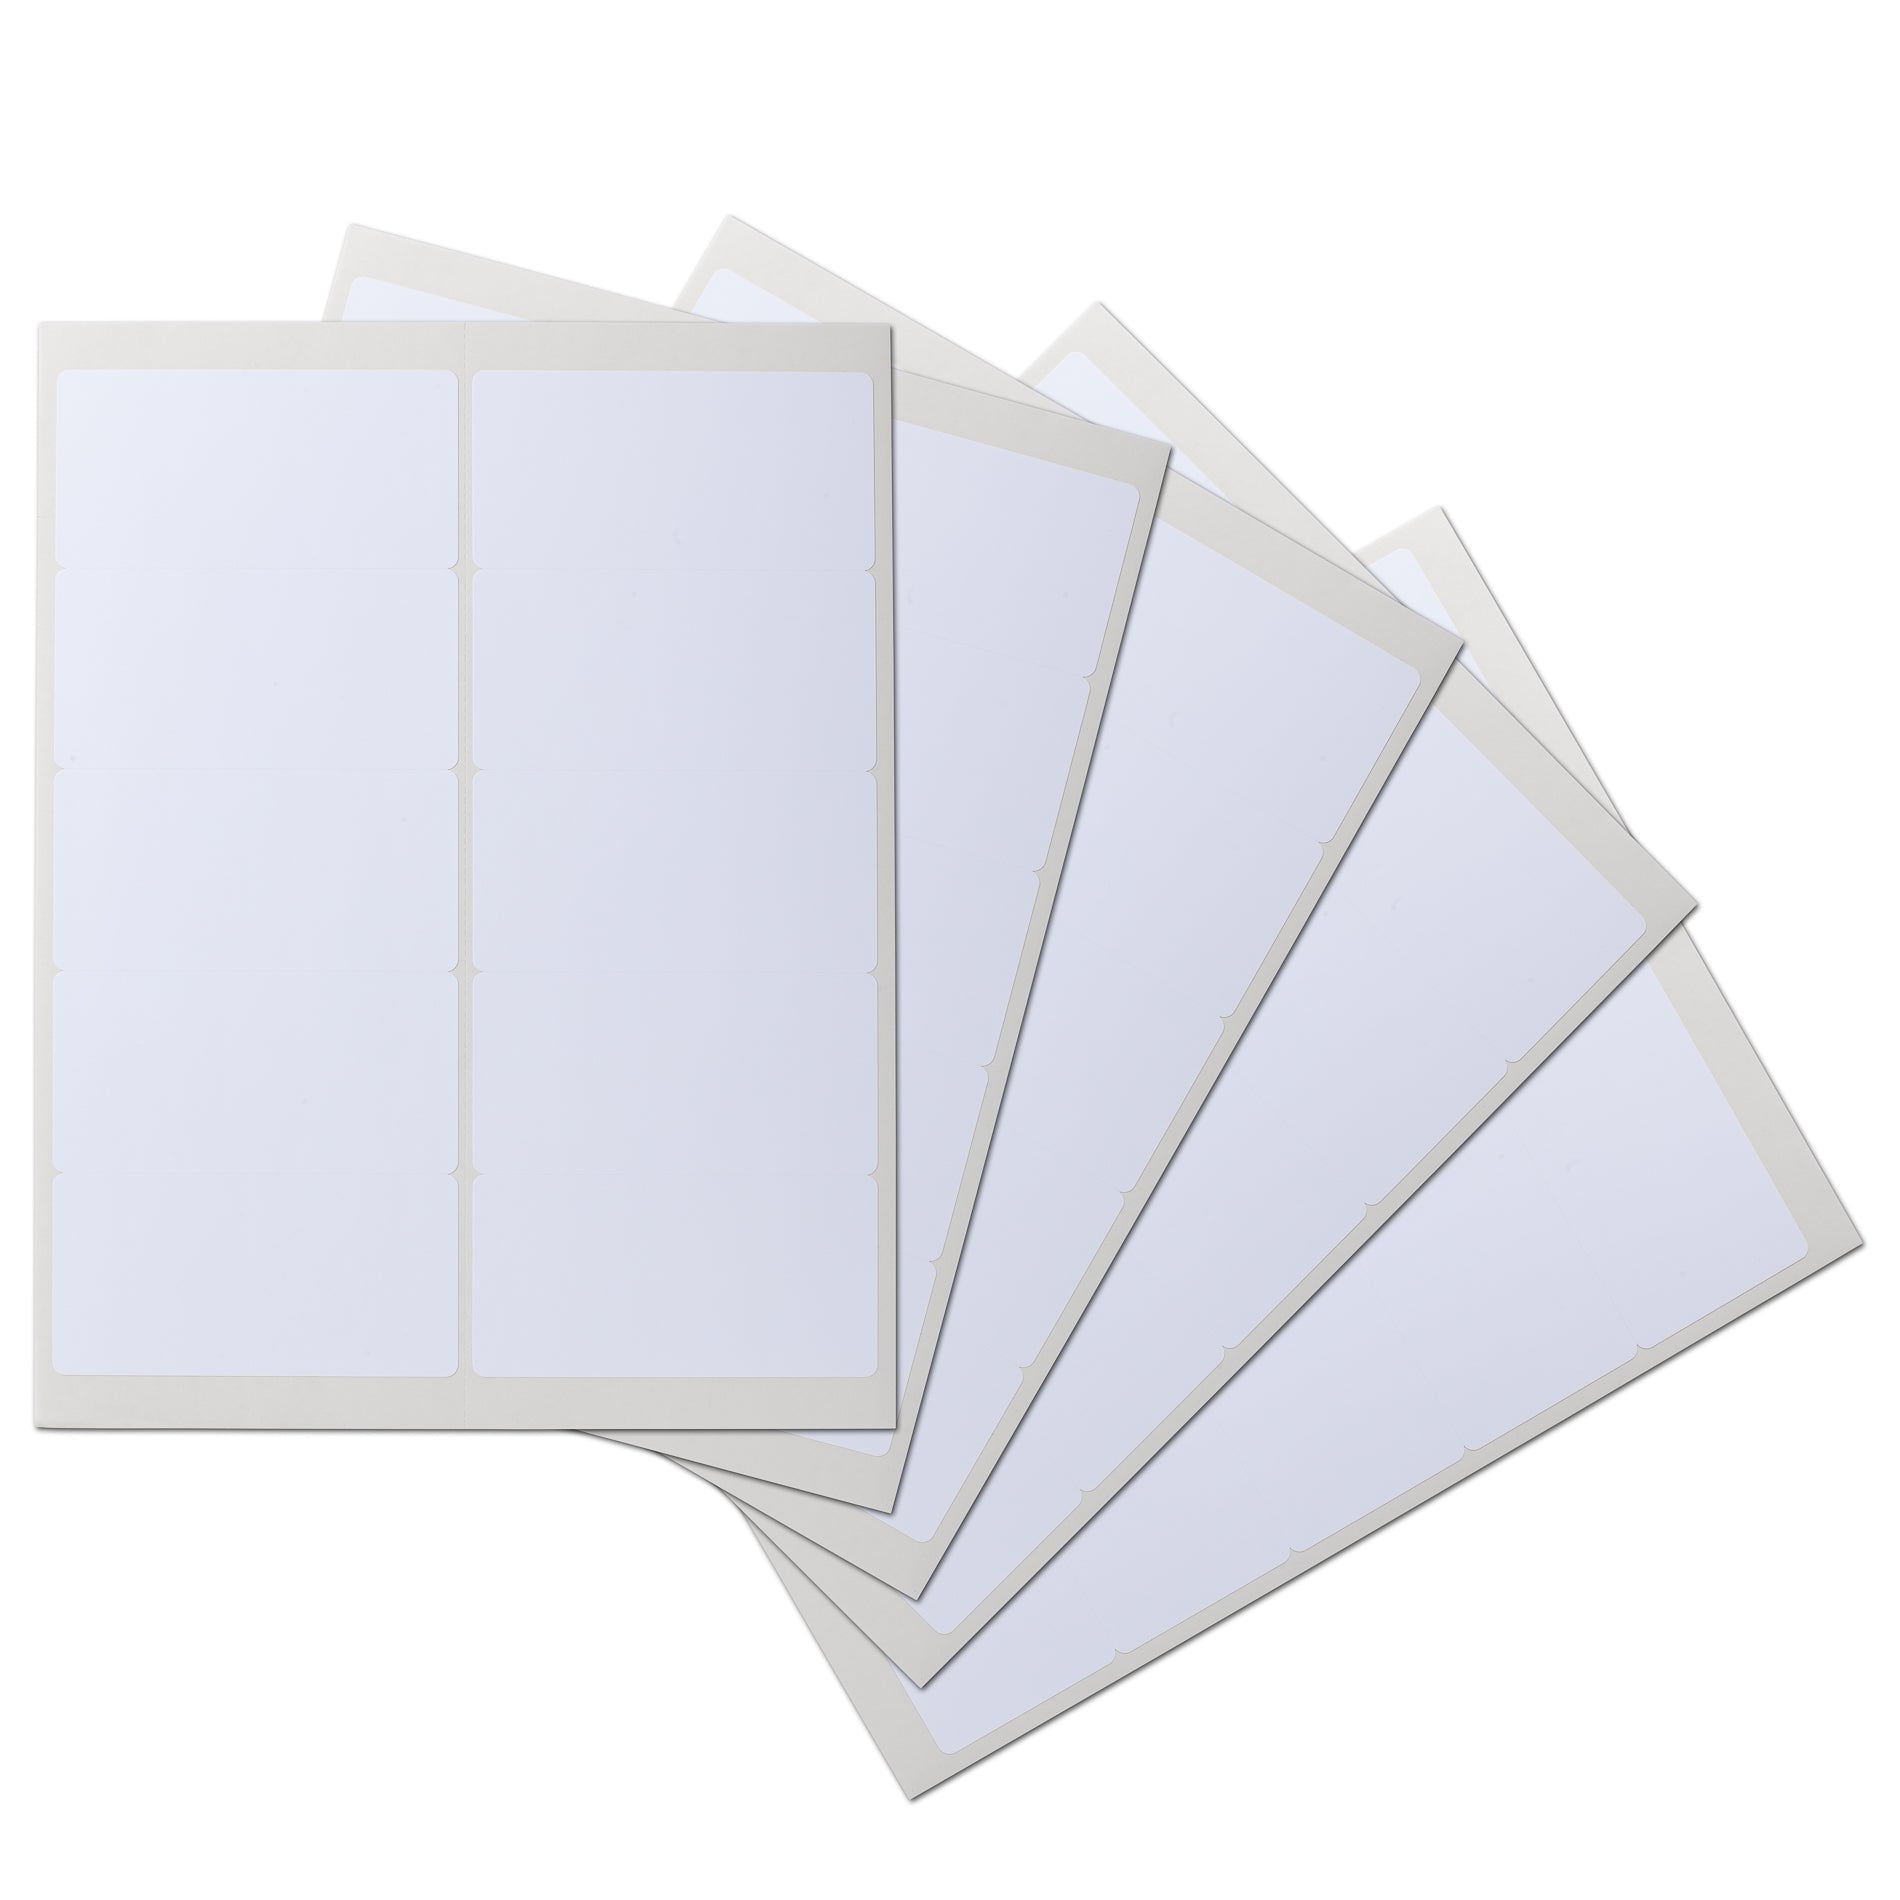 WATERPROOF Sticker Paper (With VIDEO proof) Printable A4